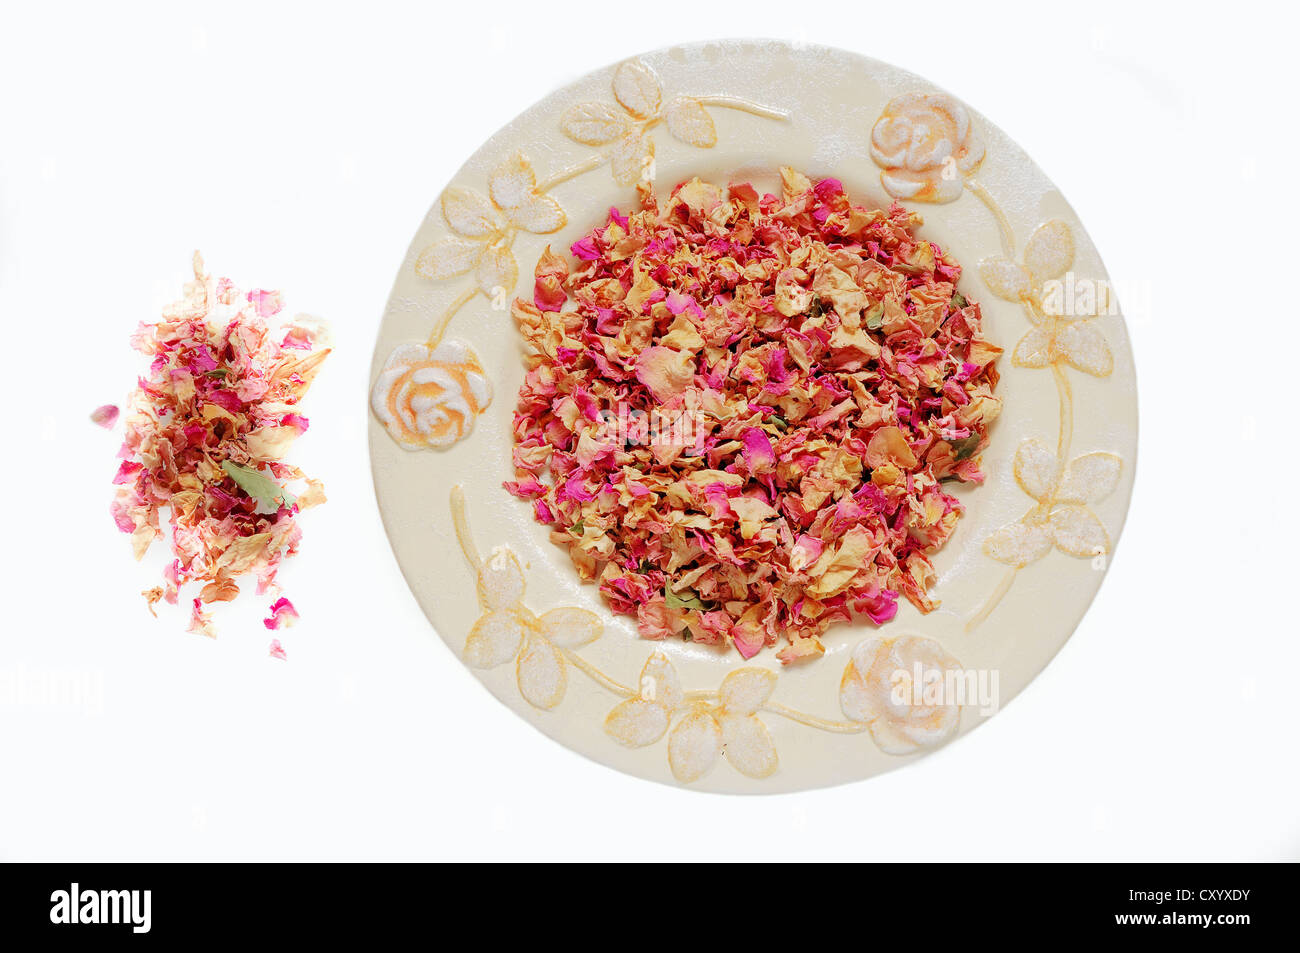 Dried rose petals on a plate (Rosa sp.), incense Stock Photo